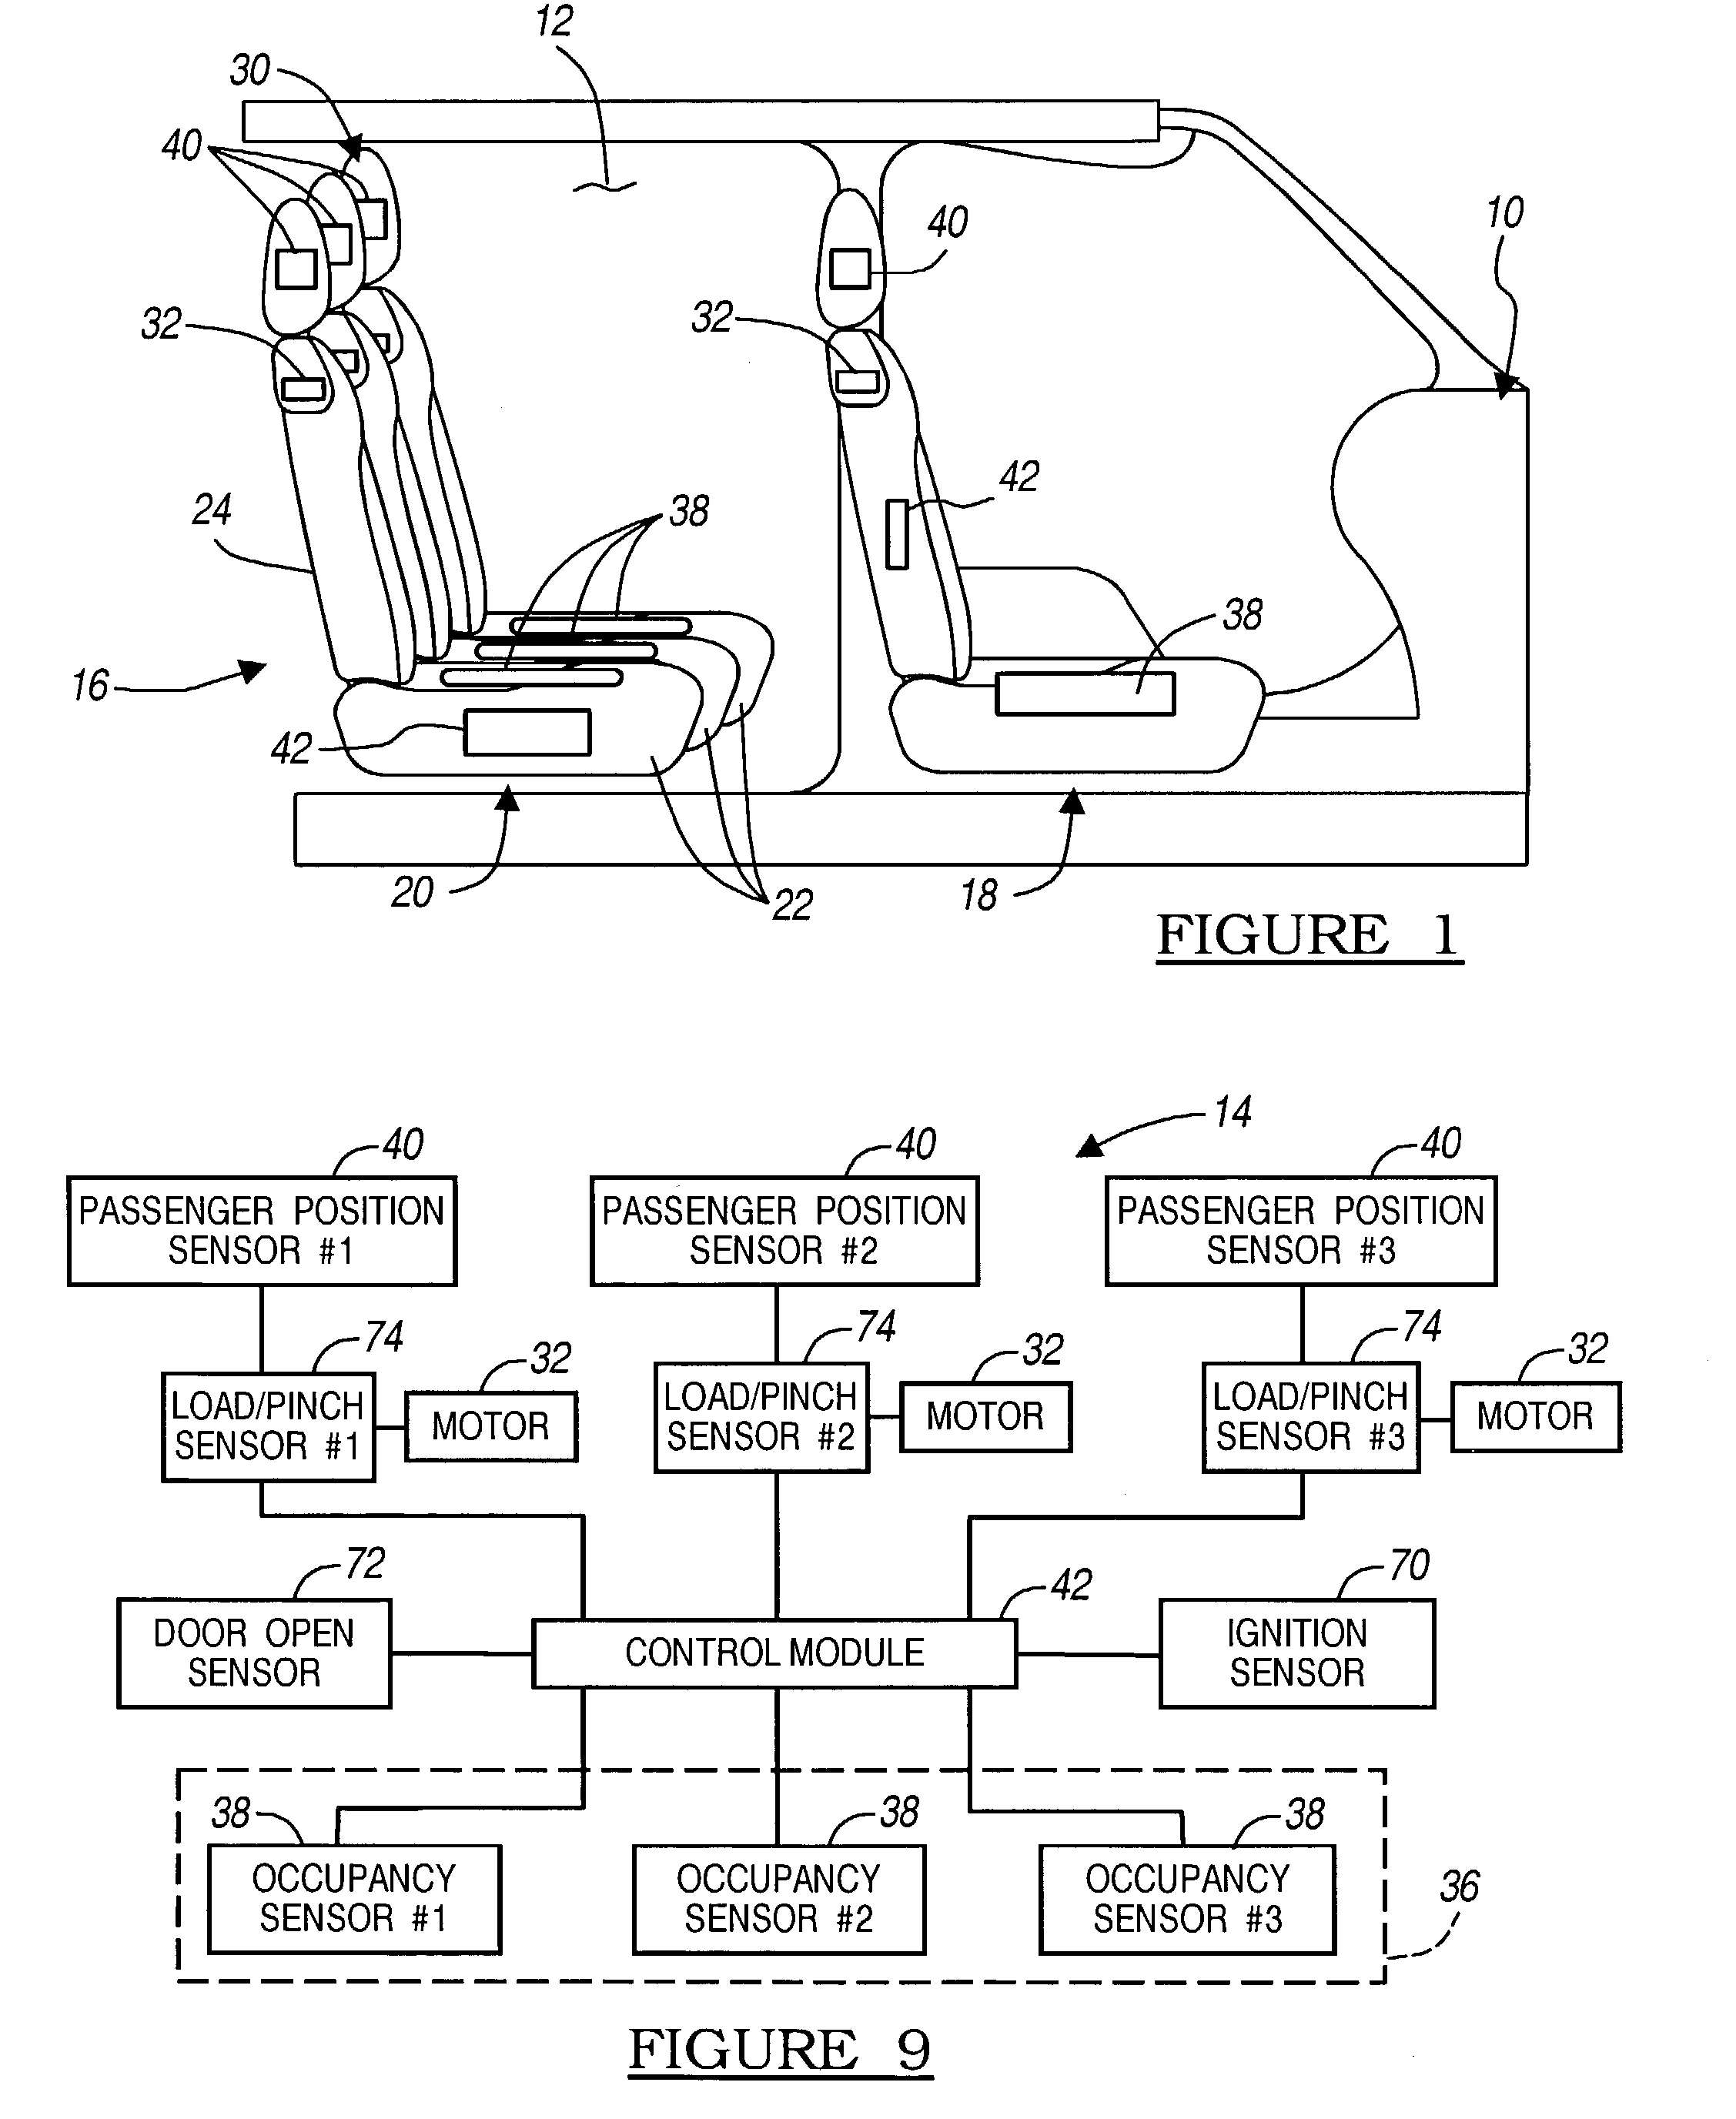 Automatic headrest adjustment control system for a vehicle seat assembly